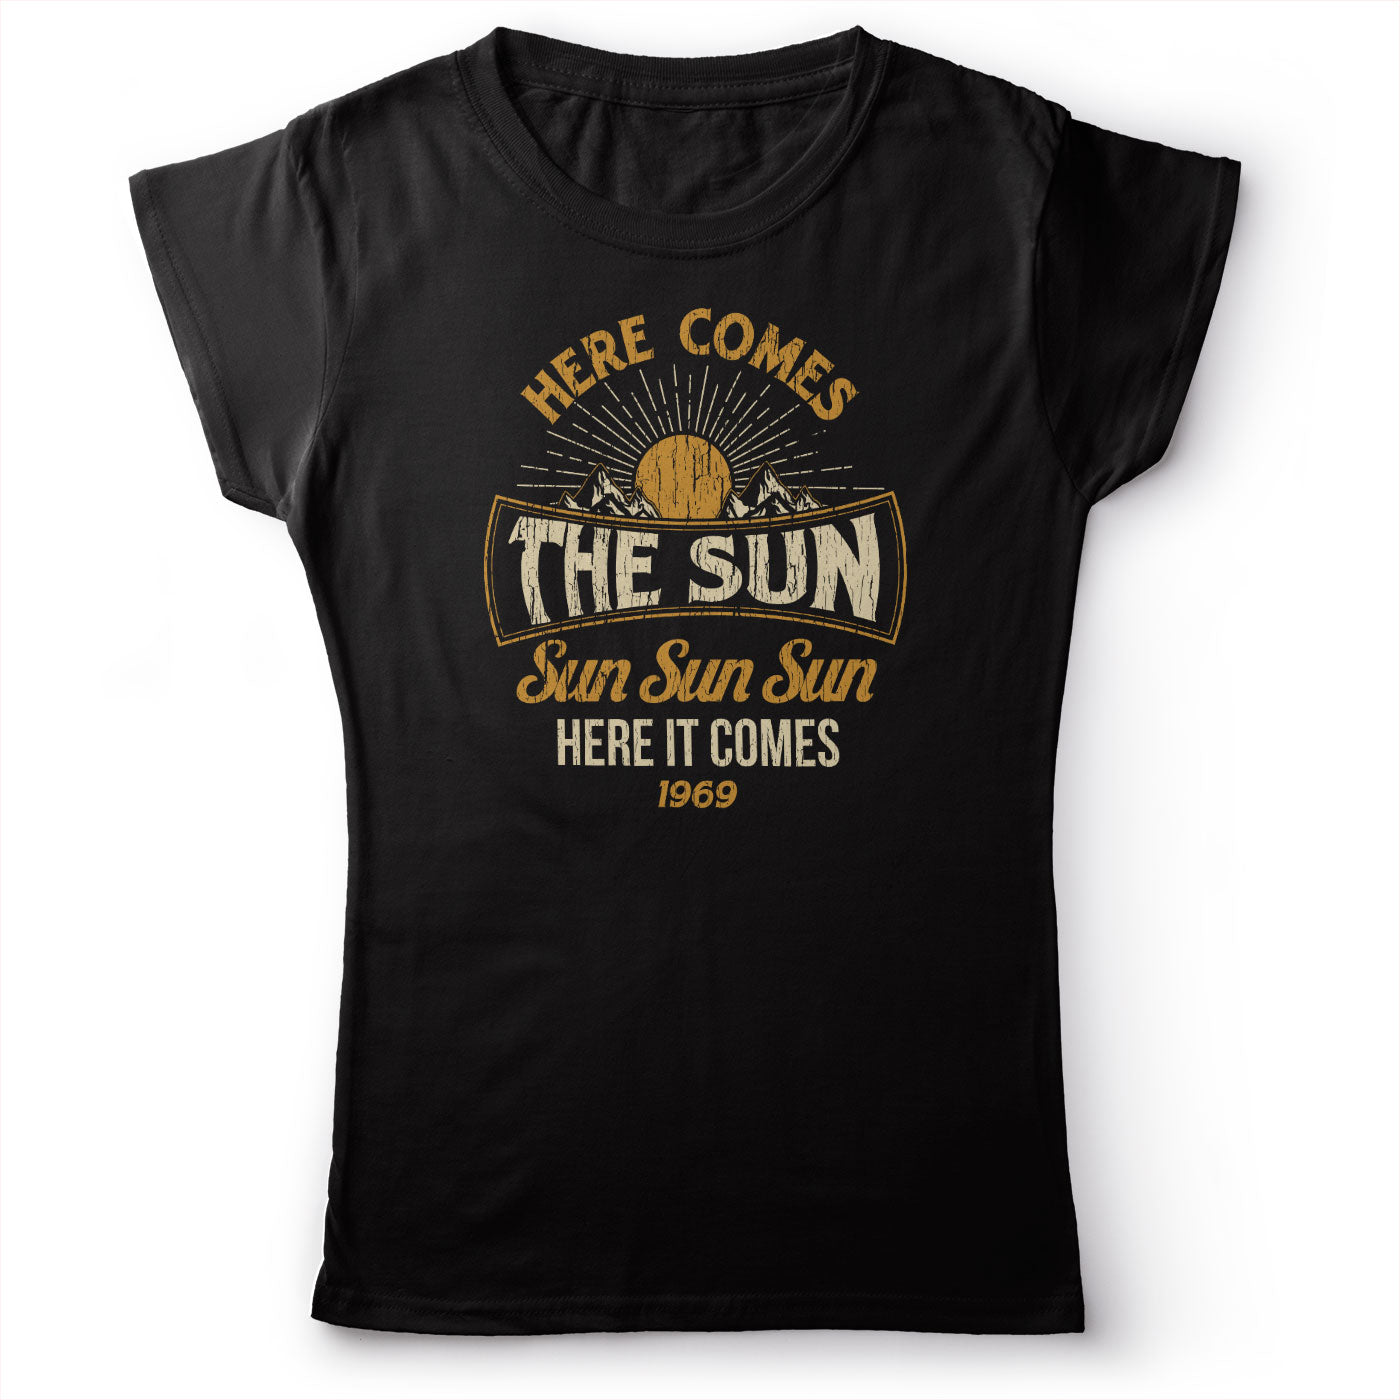 The Beatles - Here Comes The Sun - Women's T-Shirt Black 2